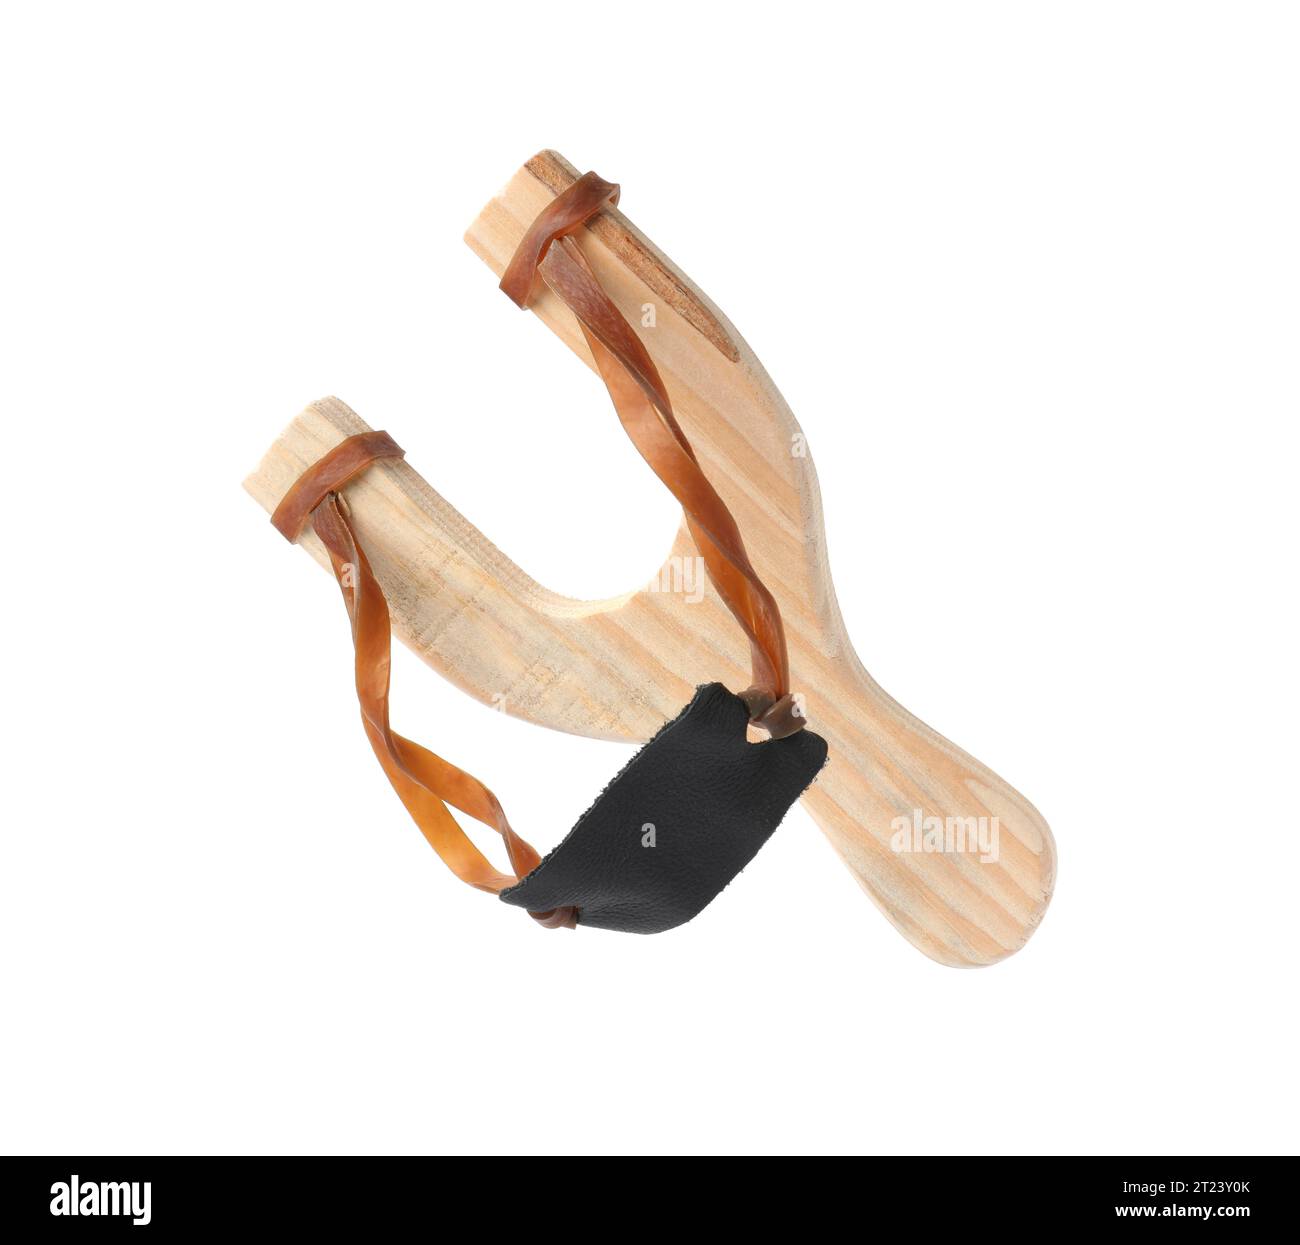 https://c8.alamy.com/comp/2T23Y0K/one-wooden-slingshot-with-leather-pouch-isolated-on-white-2T23Y0K.jpg